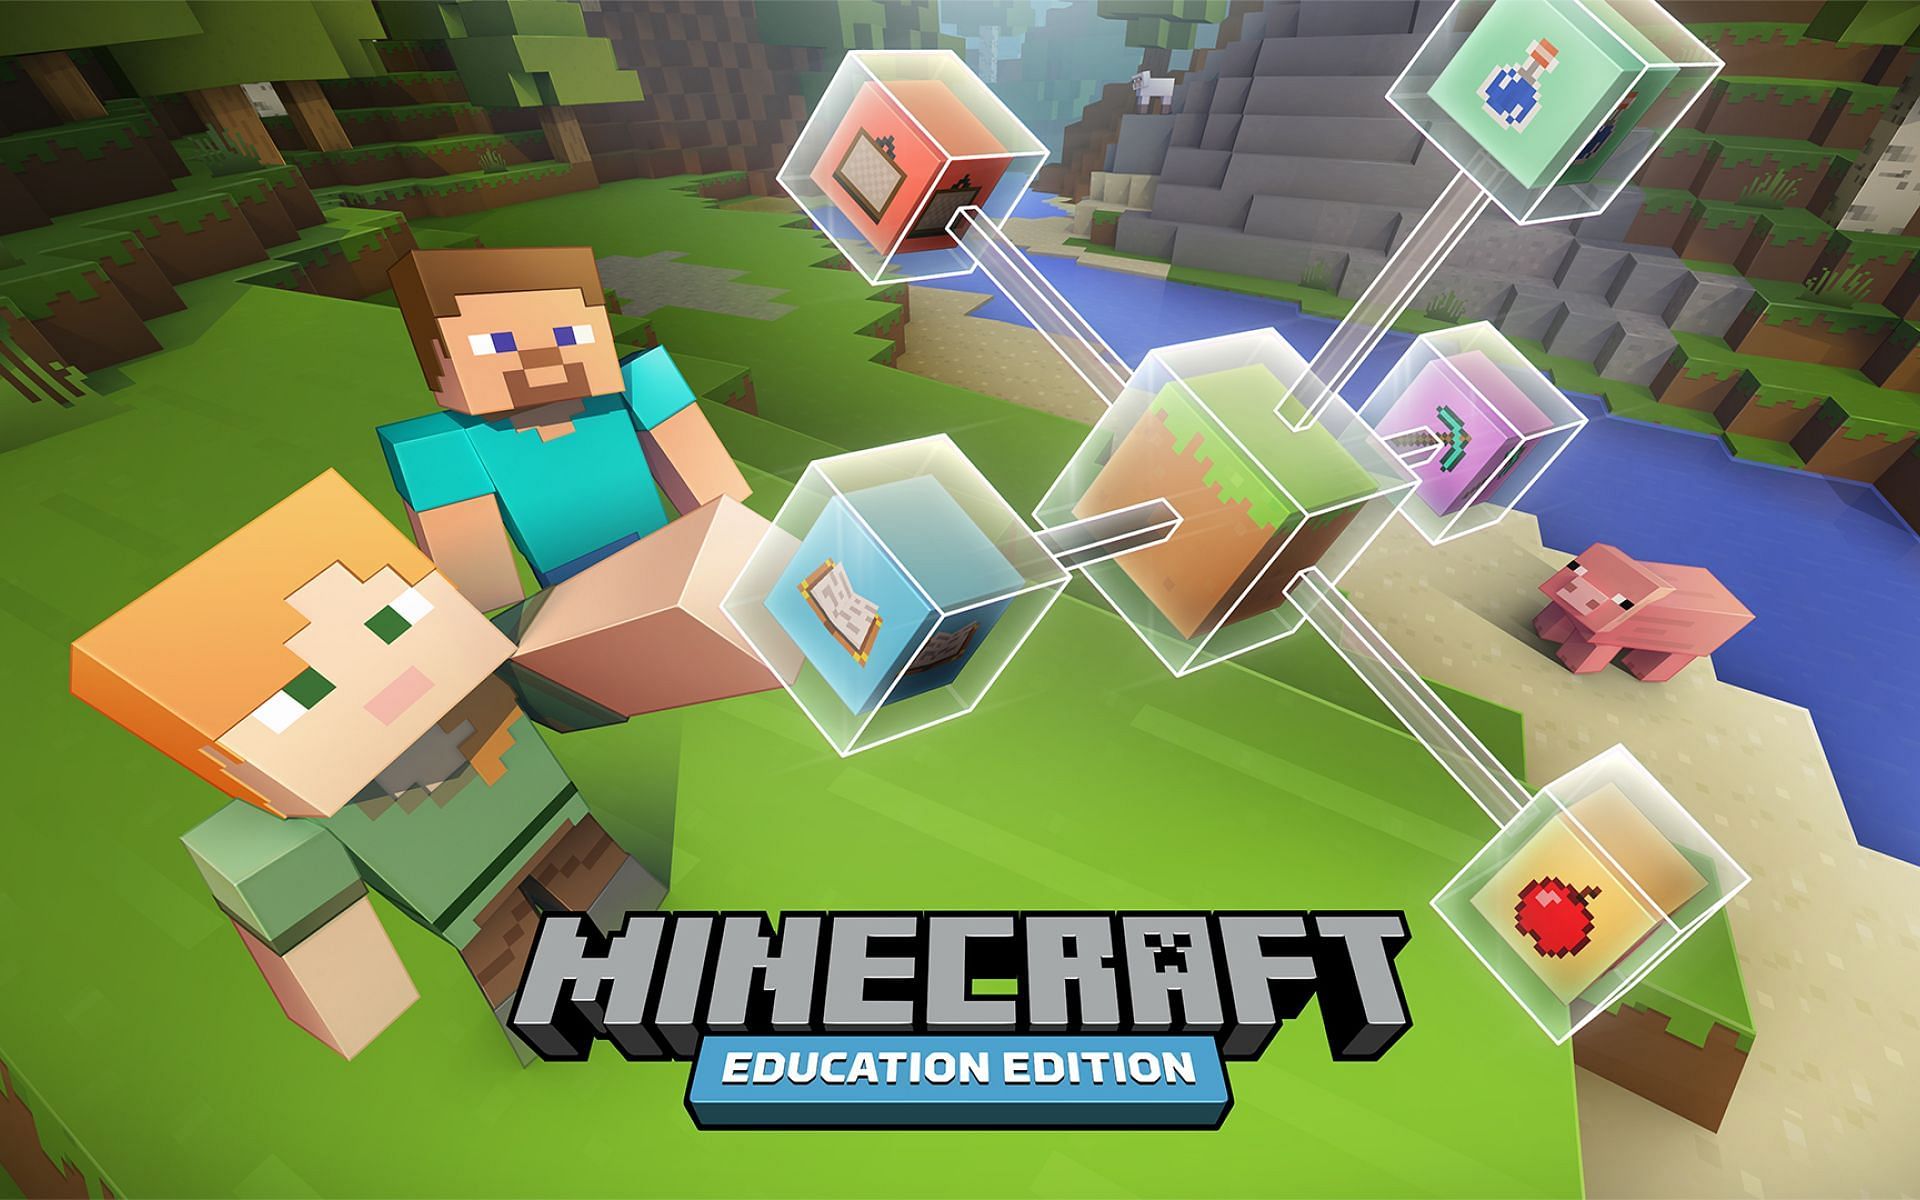 Players can learn about chemistry in-game (Image via Minecraft)